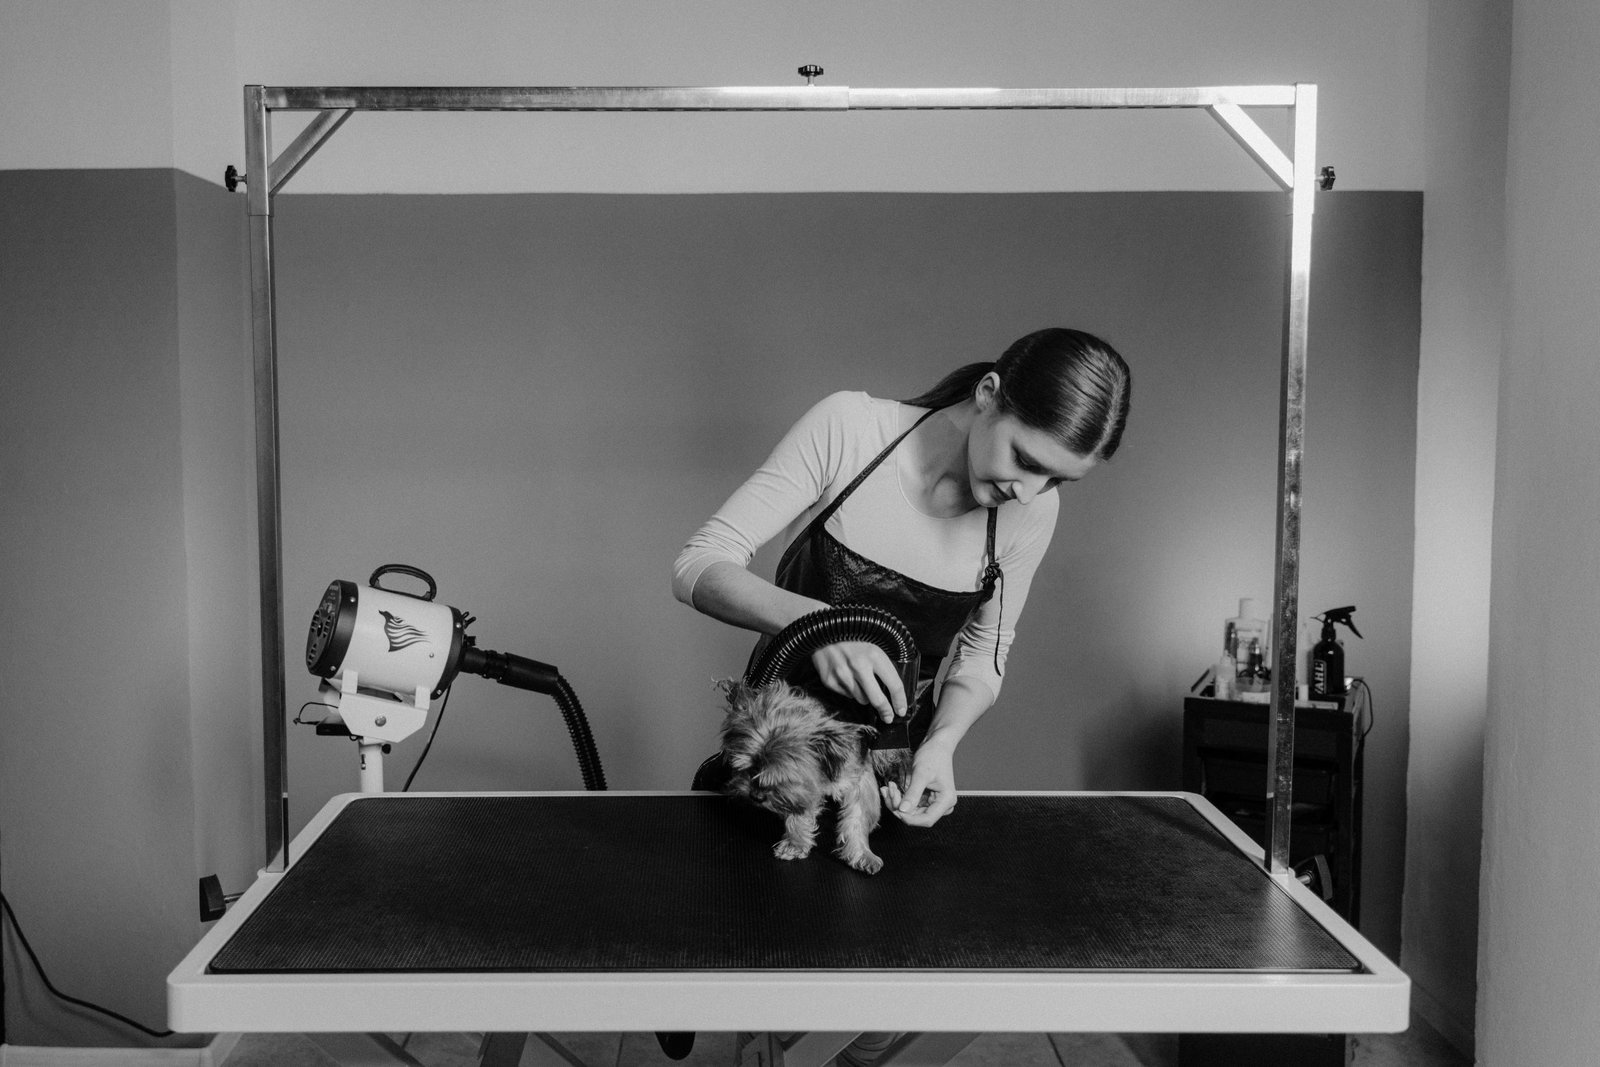 Woman grooming dog on a grooming table